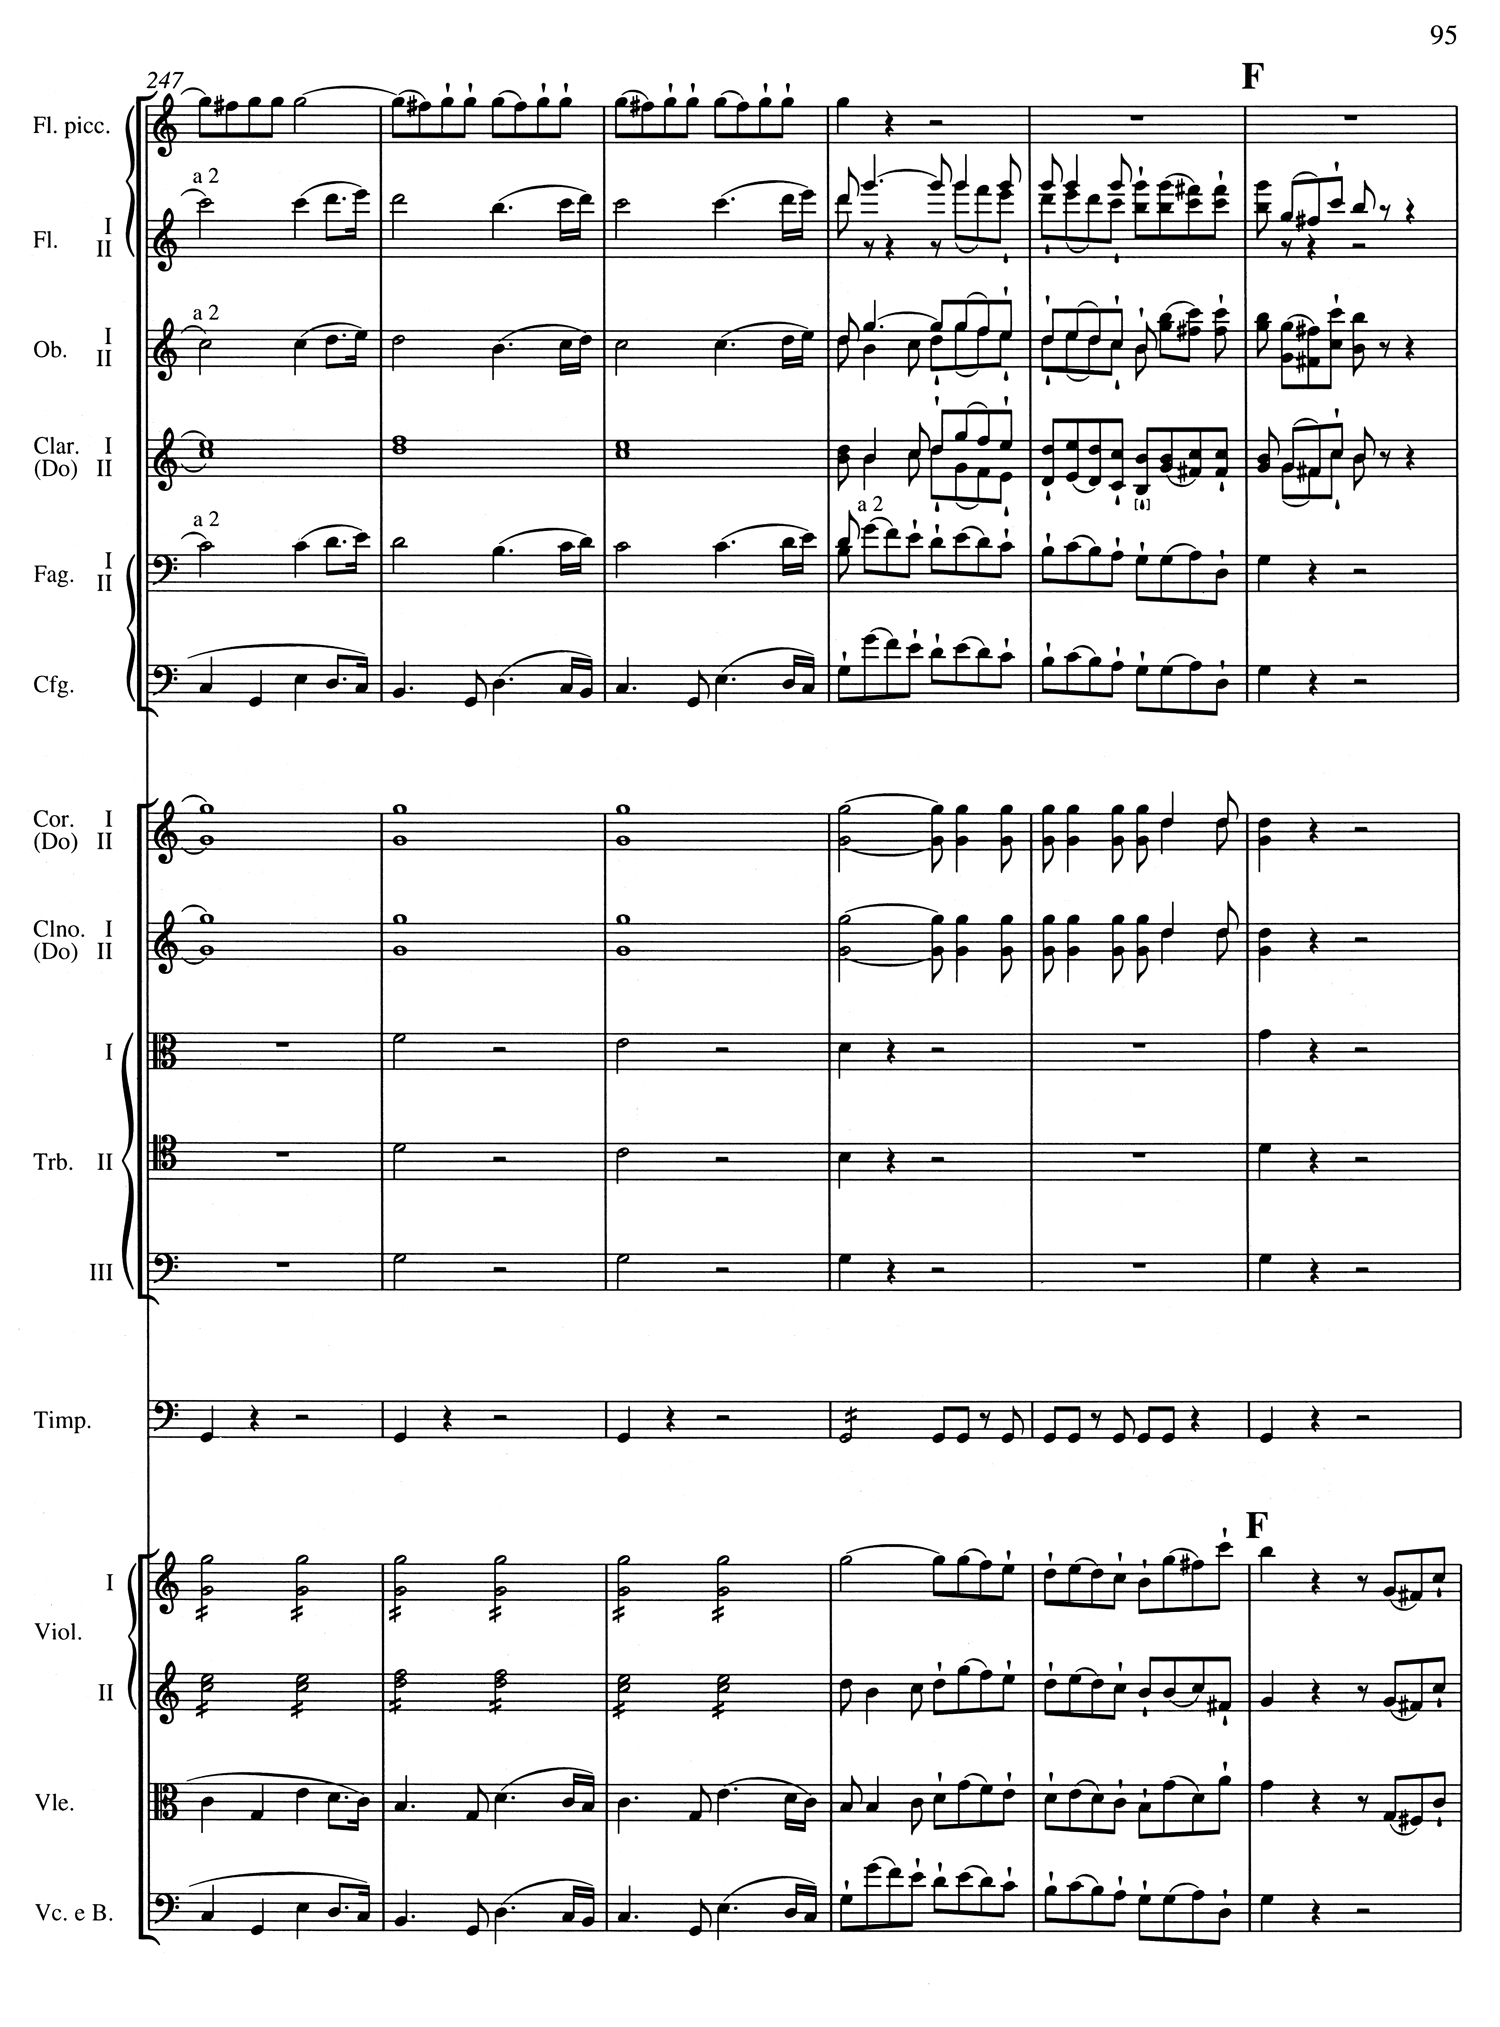 Beethoven 5 Score Page 7.jpg